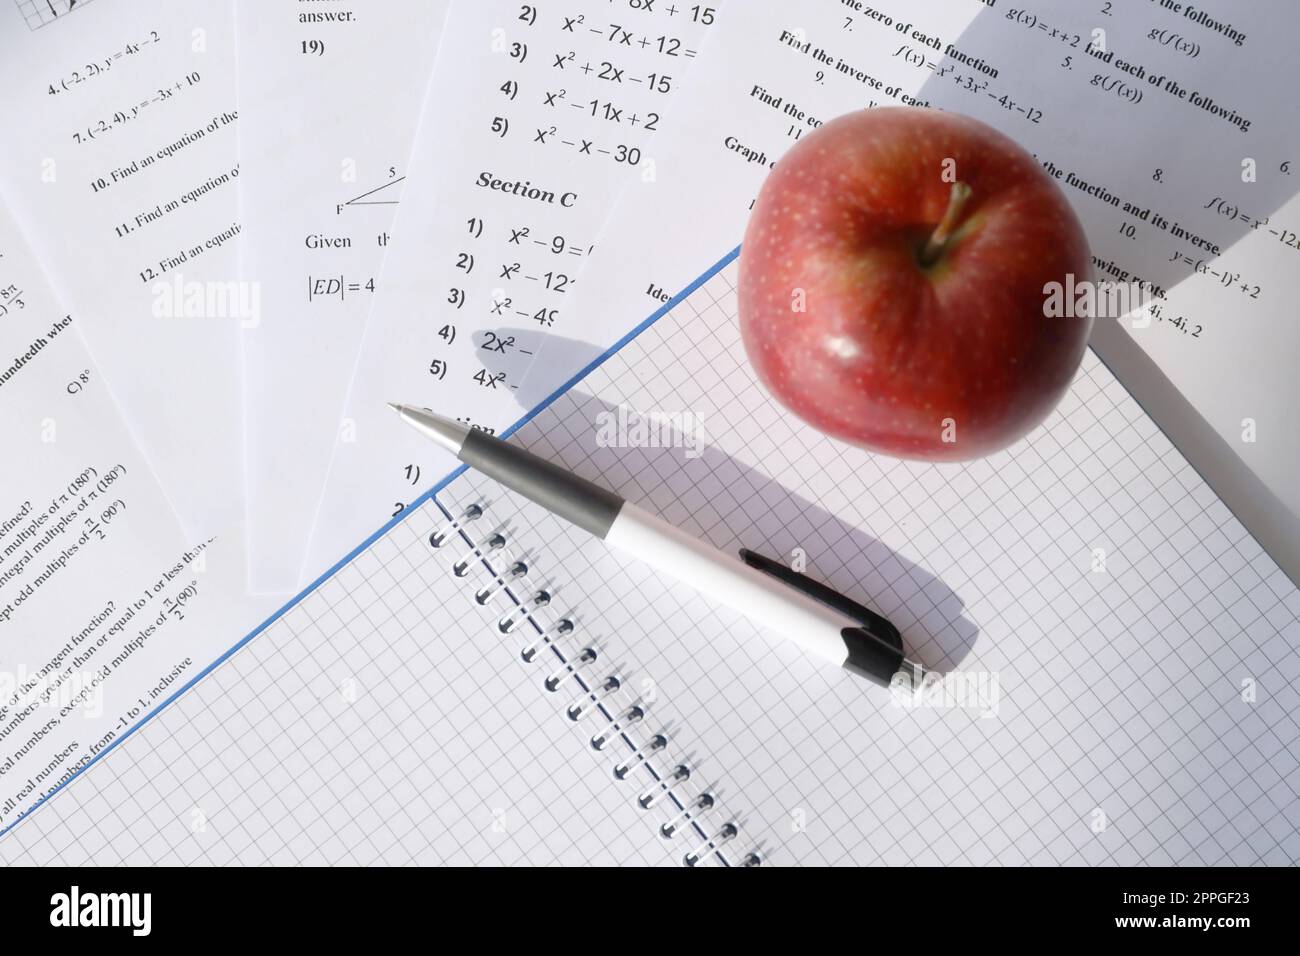 Handwriting of mathematics quadratic equation on examination, practice, quiz or test in maths class. Solving exponential equations concept. Stock Photo